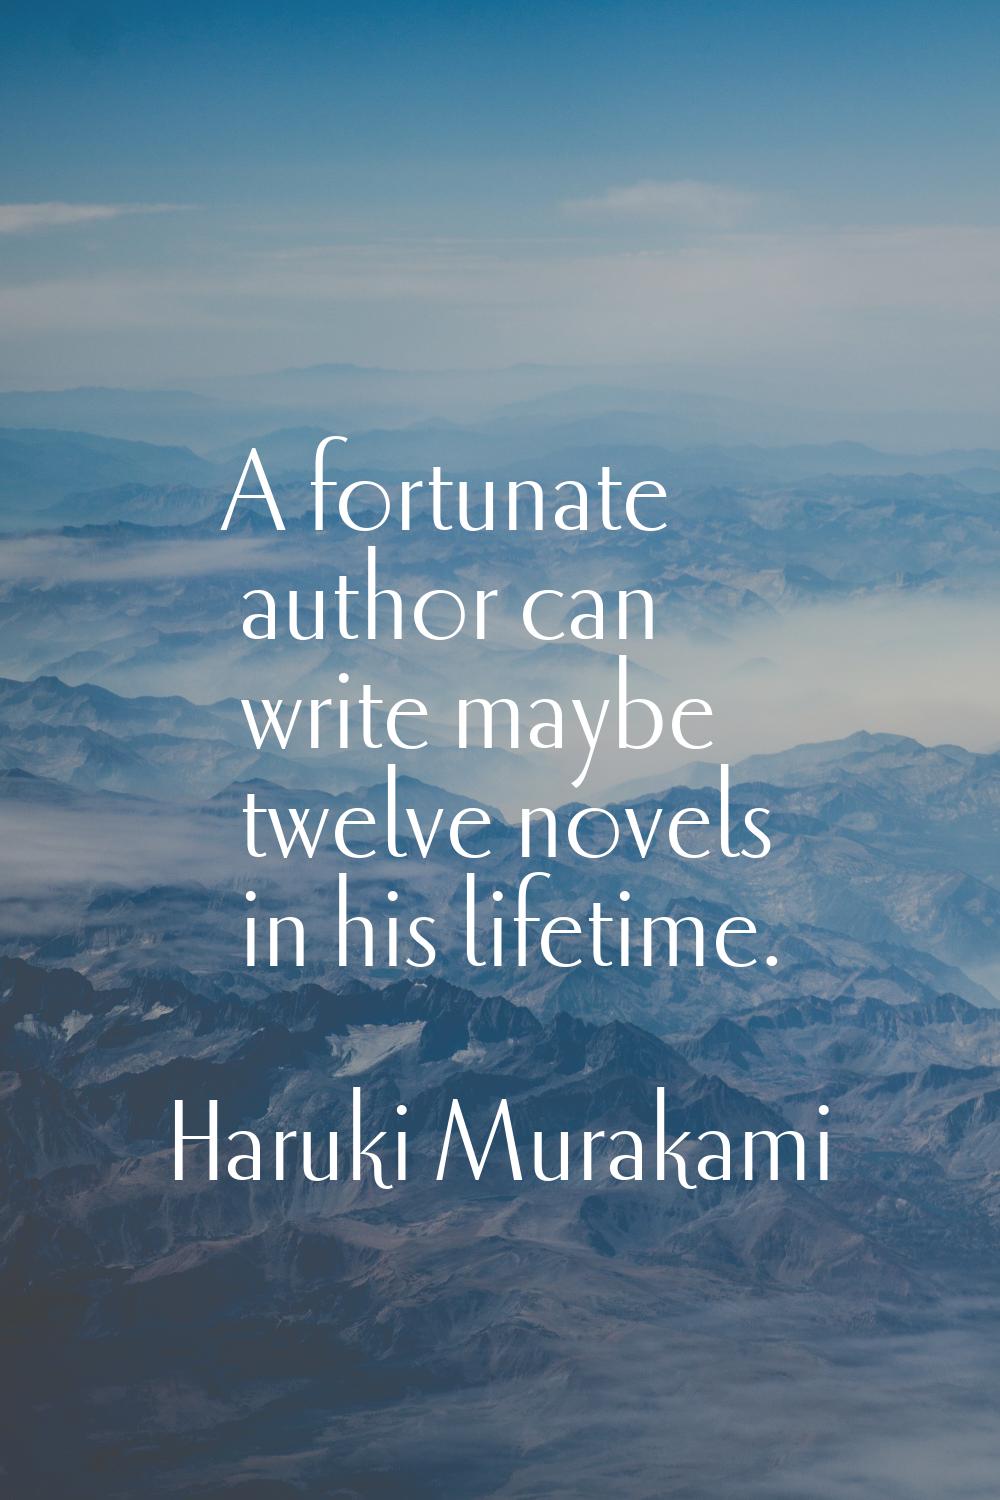 A fortunate author can write maybe twelve novels in his lifetime.